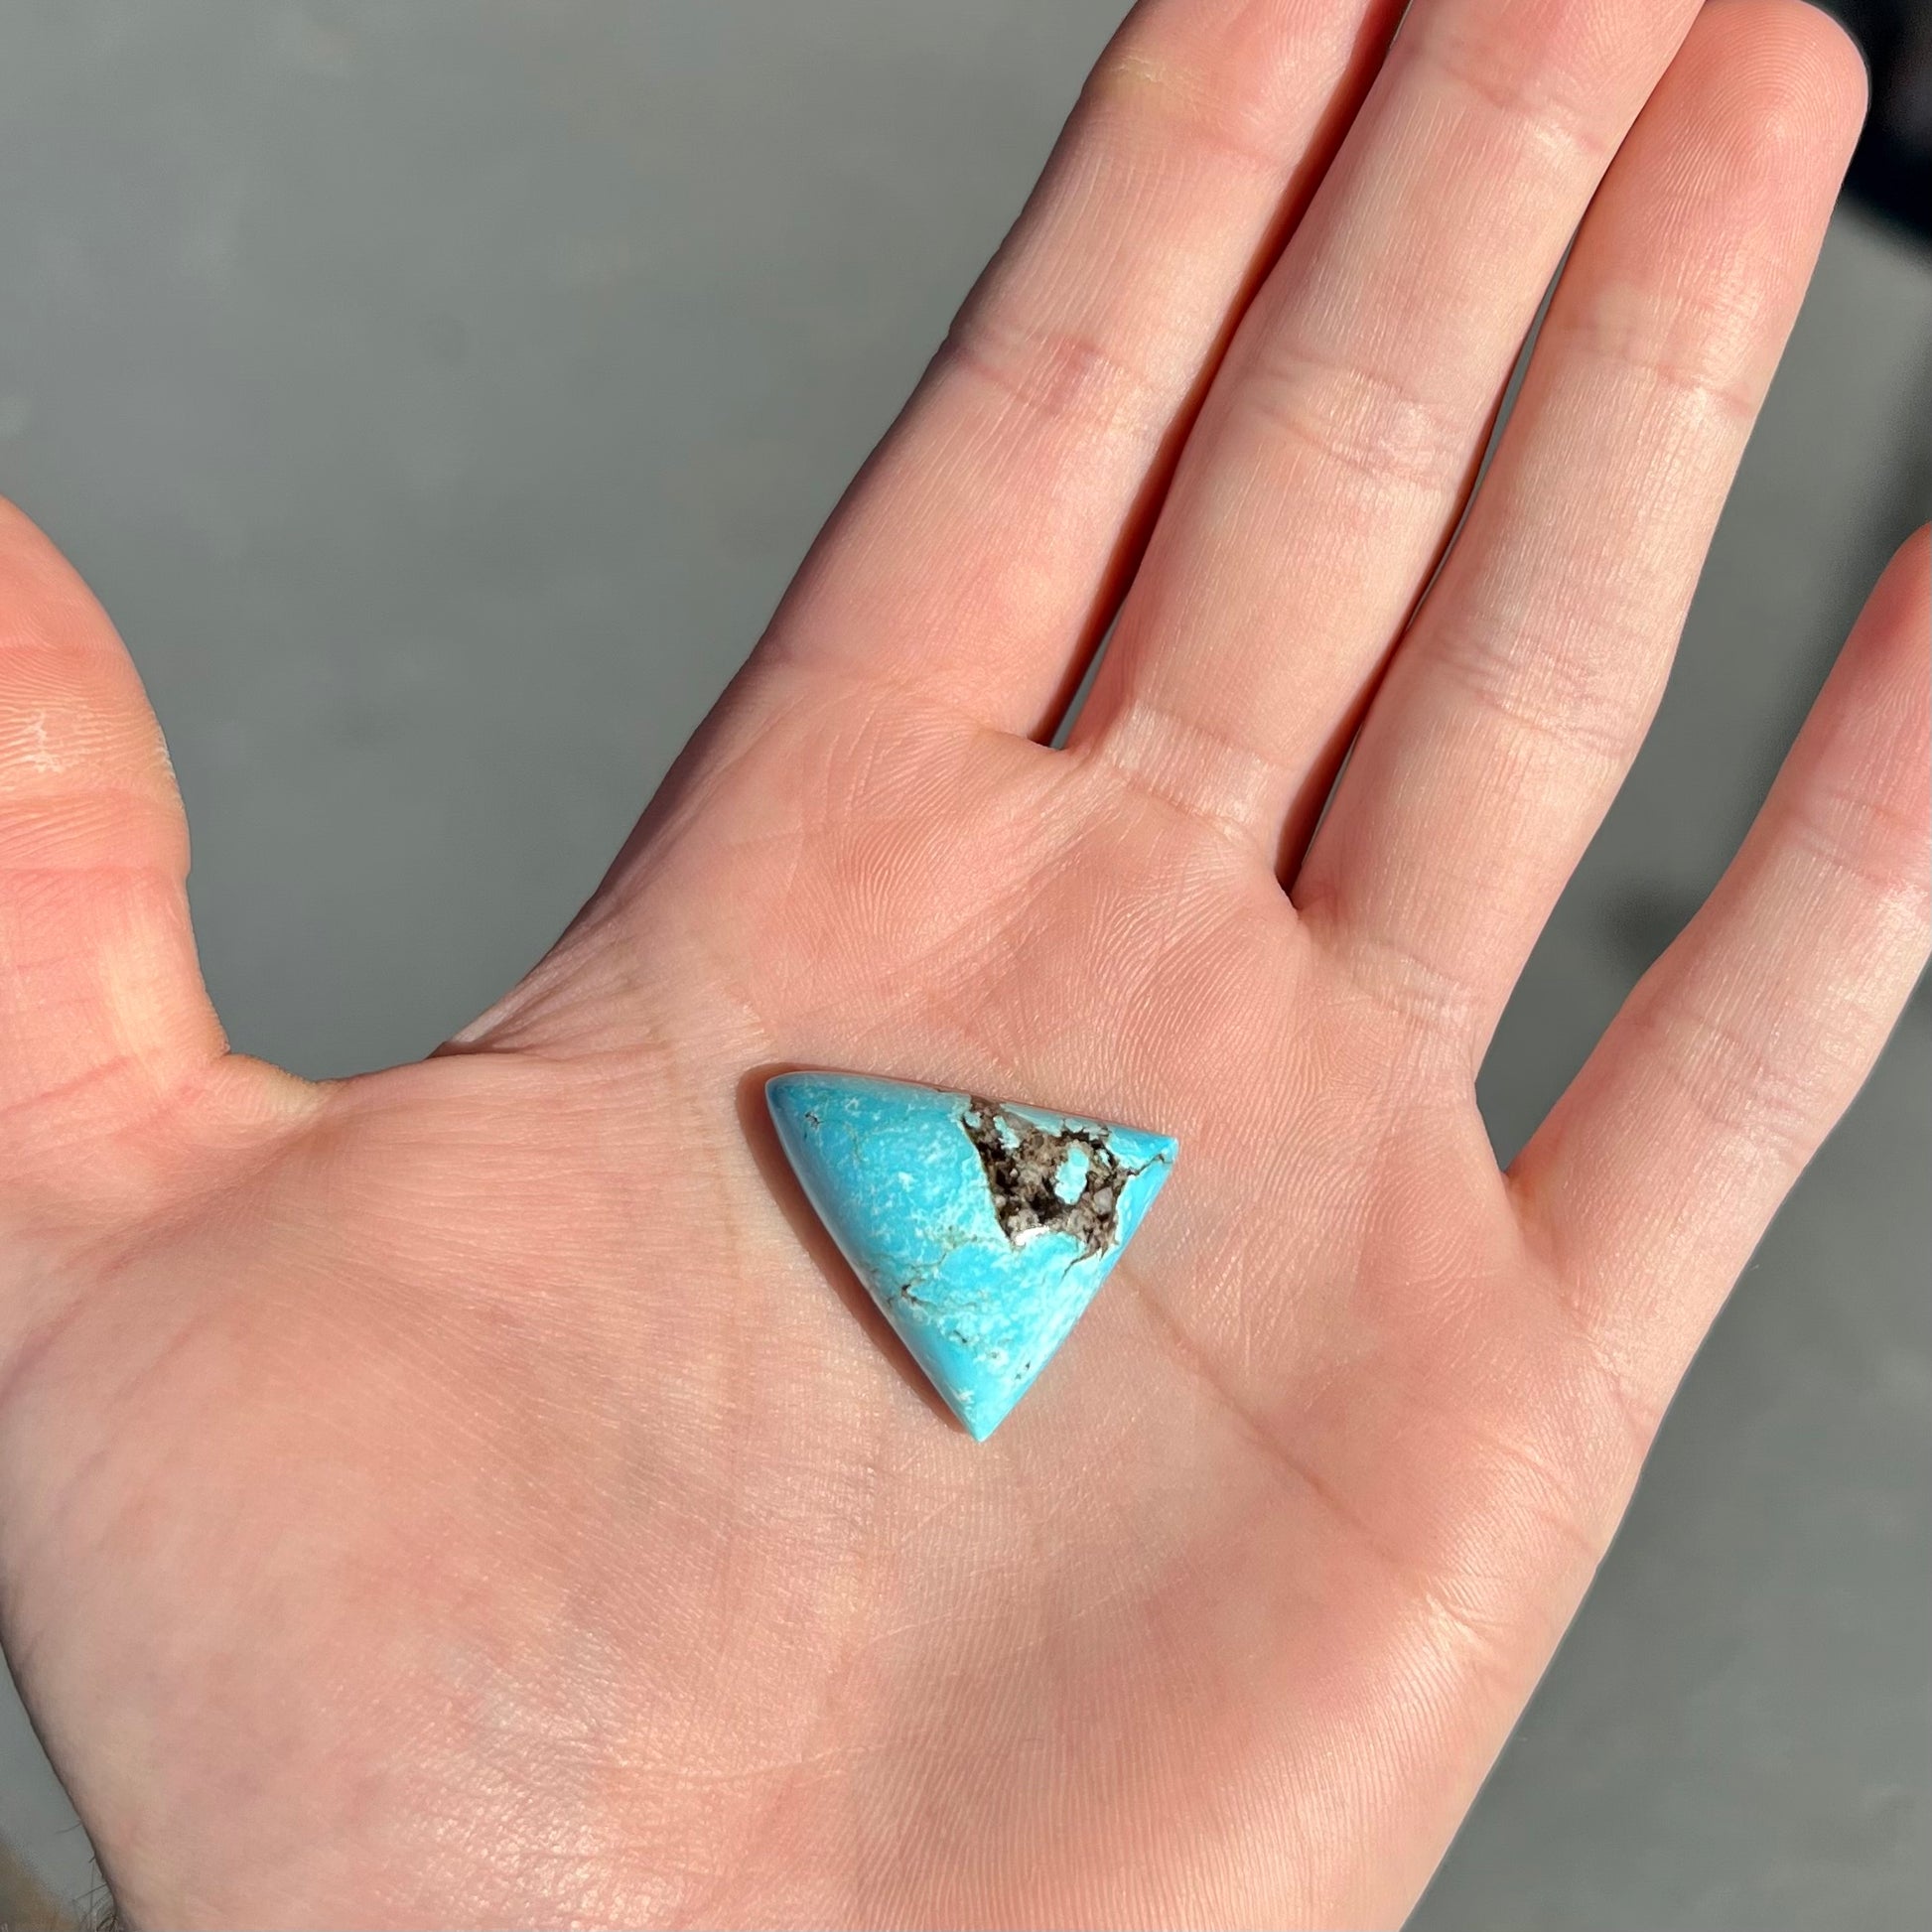 A triangular cabochon cut turquoise stone from the Valley Blue mine in Lander County, Nevada.  The stone has a black matrix.